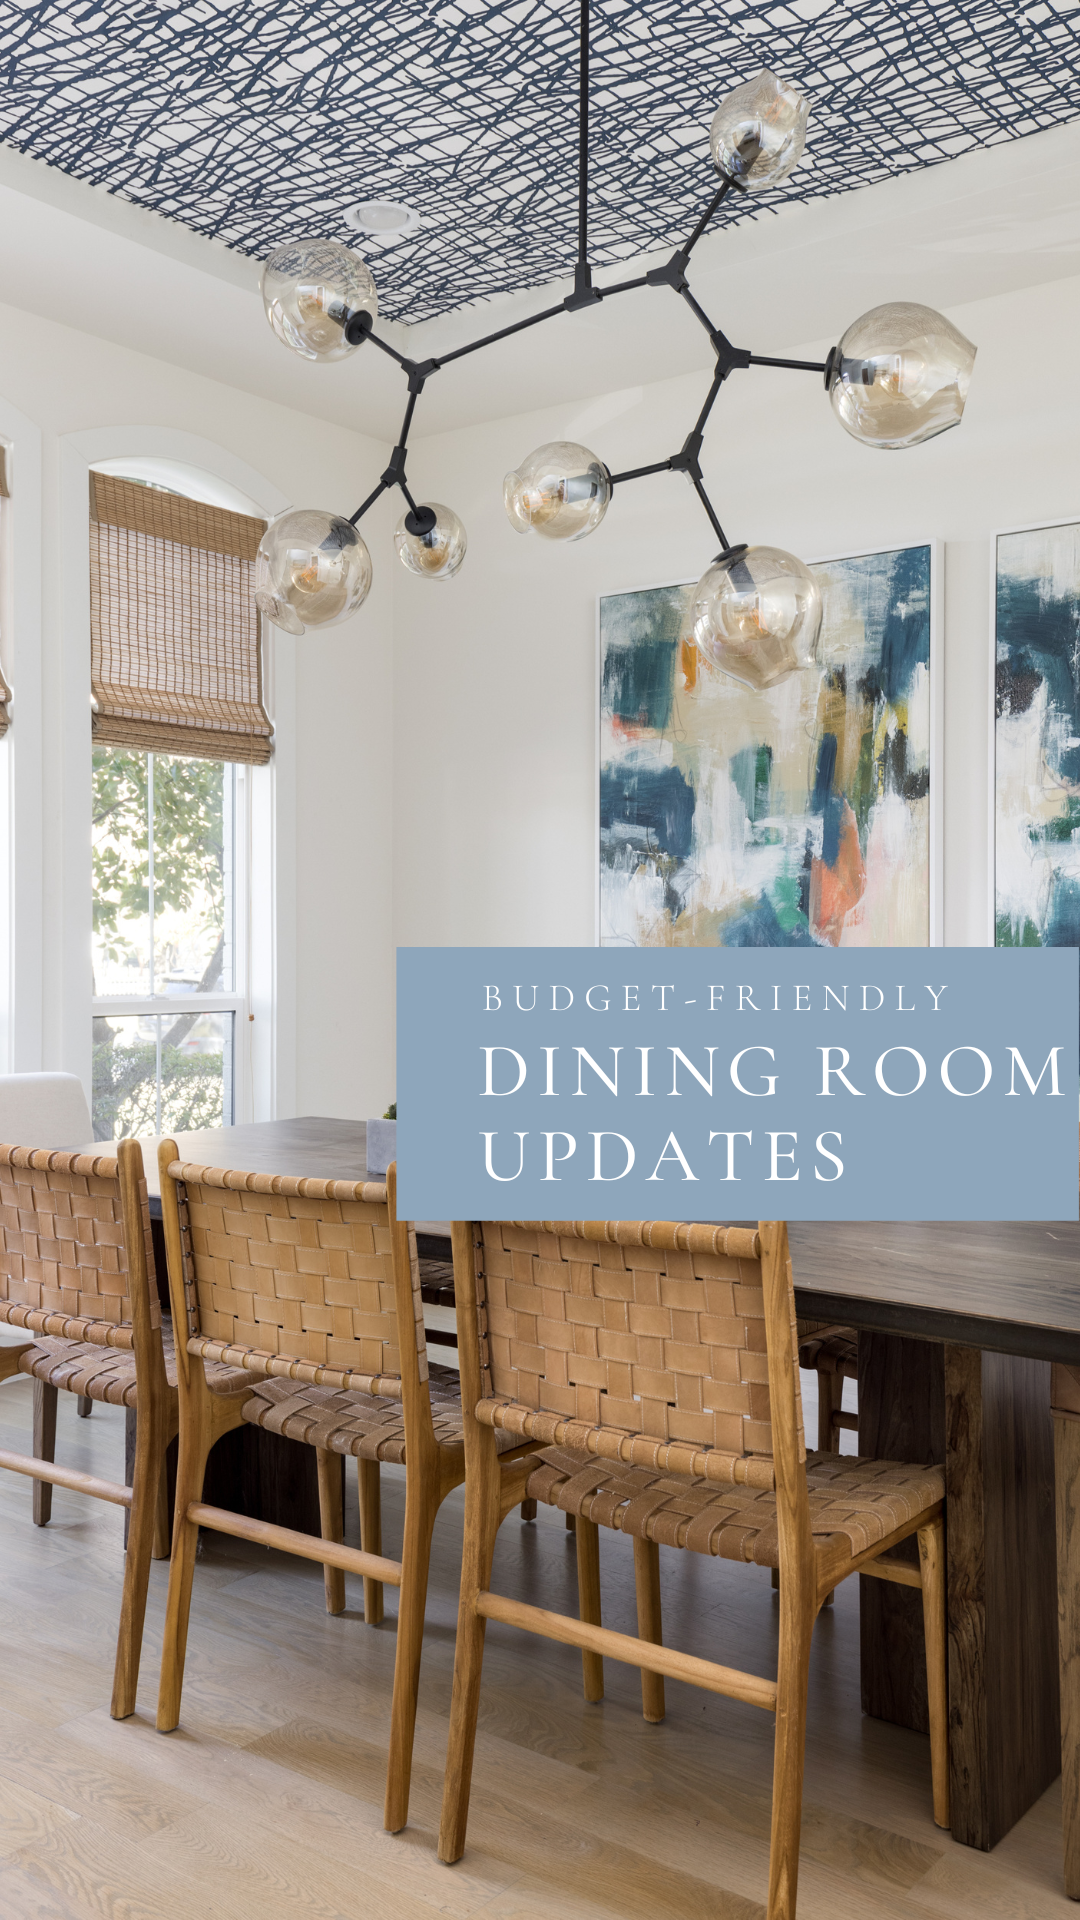 Budget-friendly dining